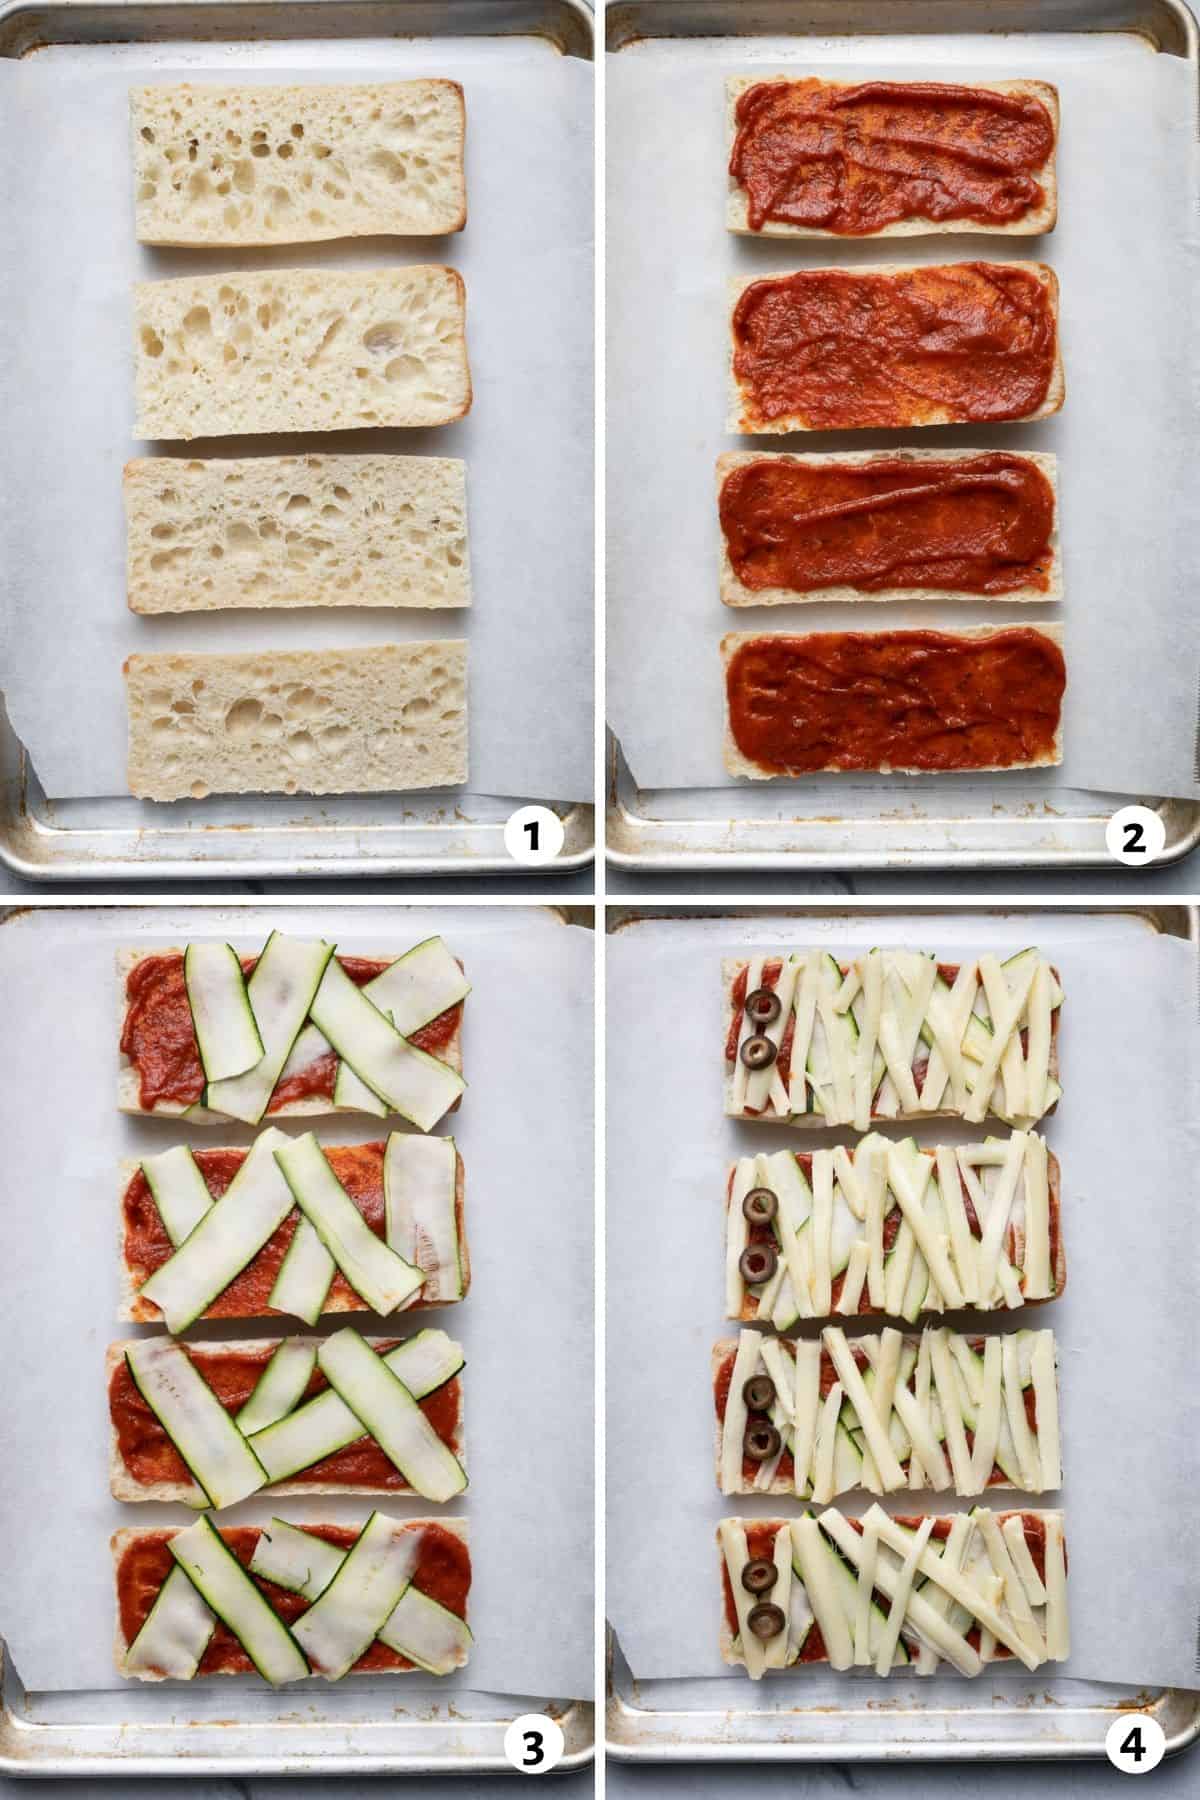 4 image collage to show how to layer the bread to make the pizza